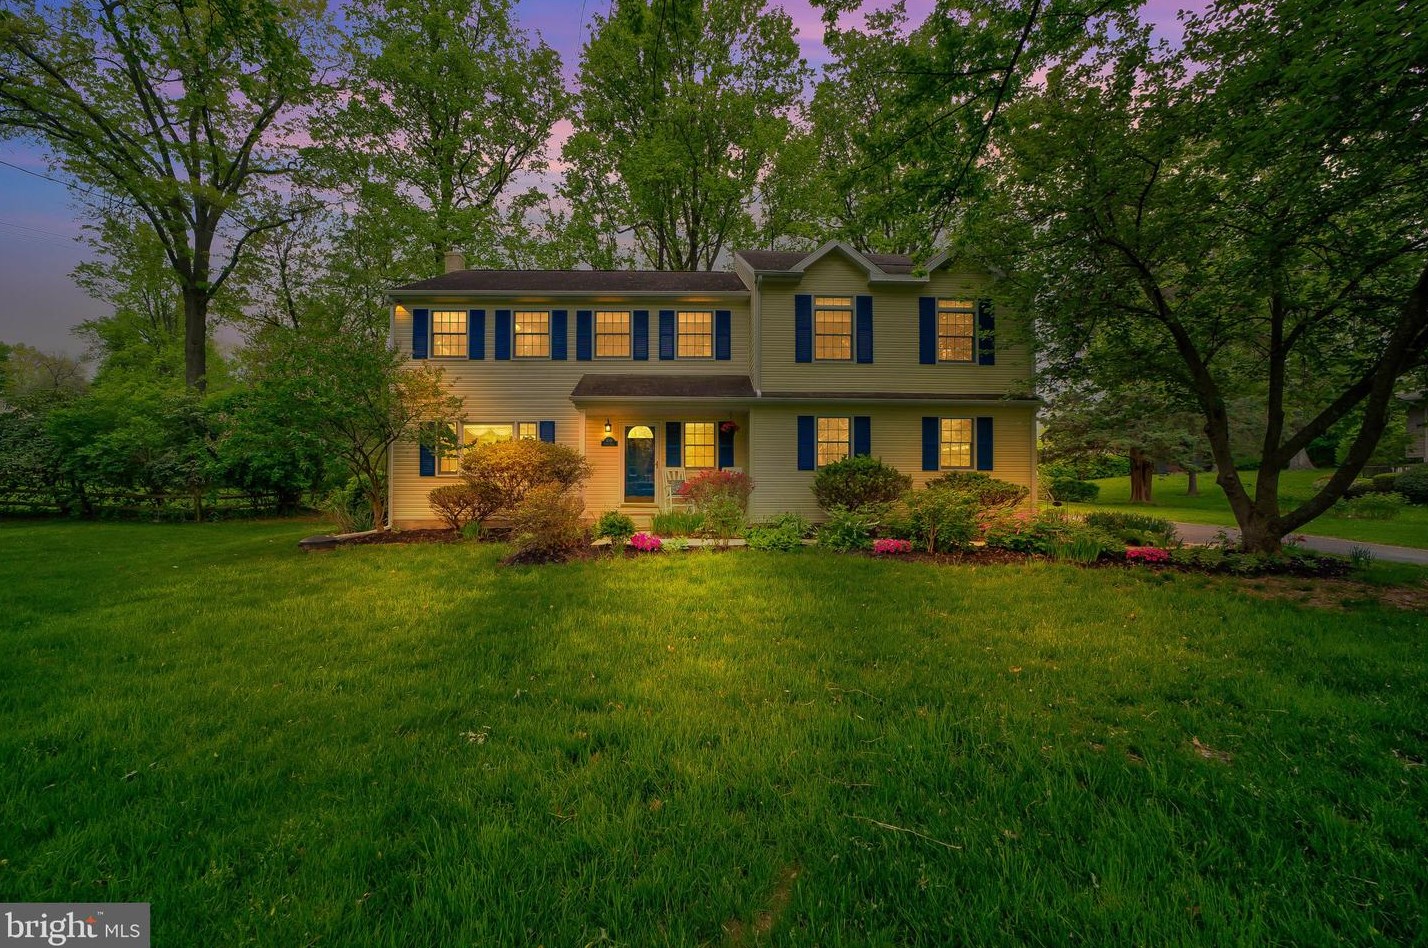 1348 Sweet Briar Rd, West Chester, PA 19380